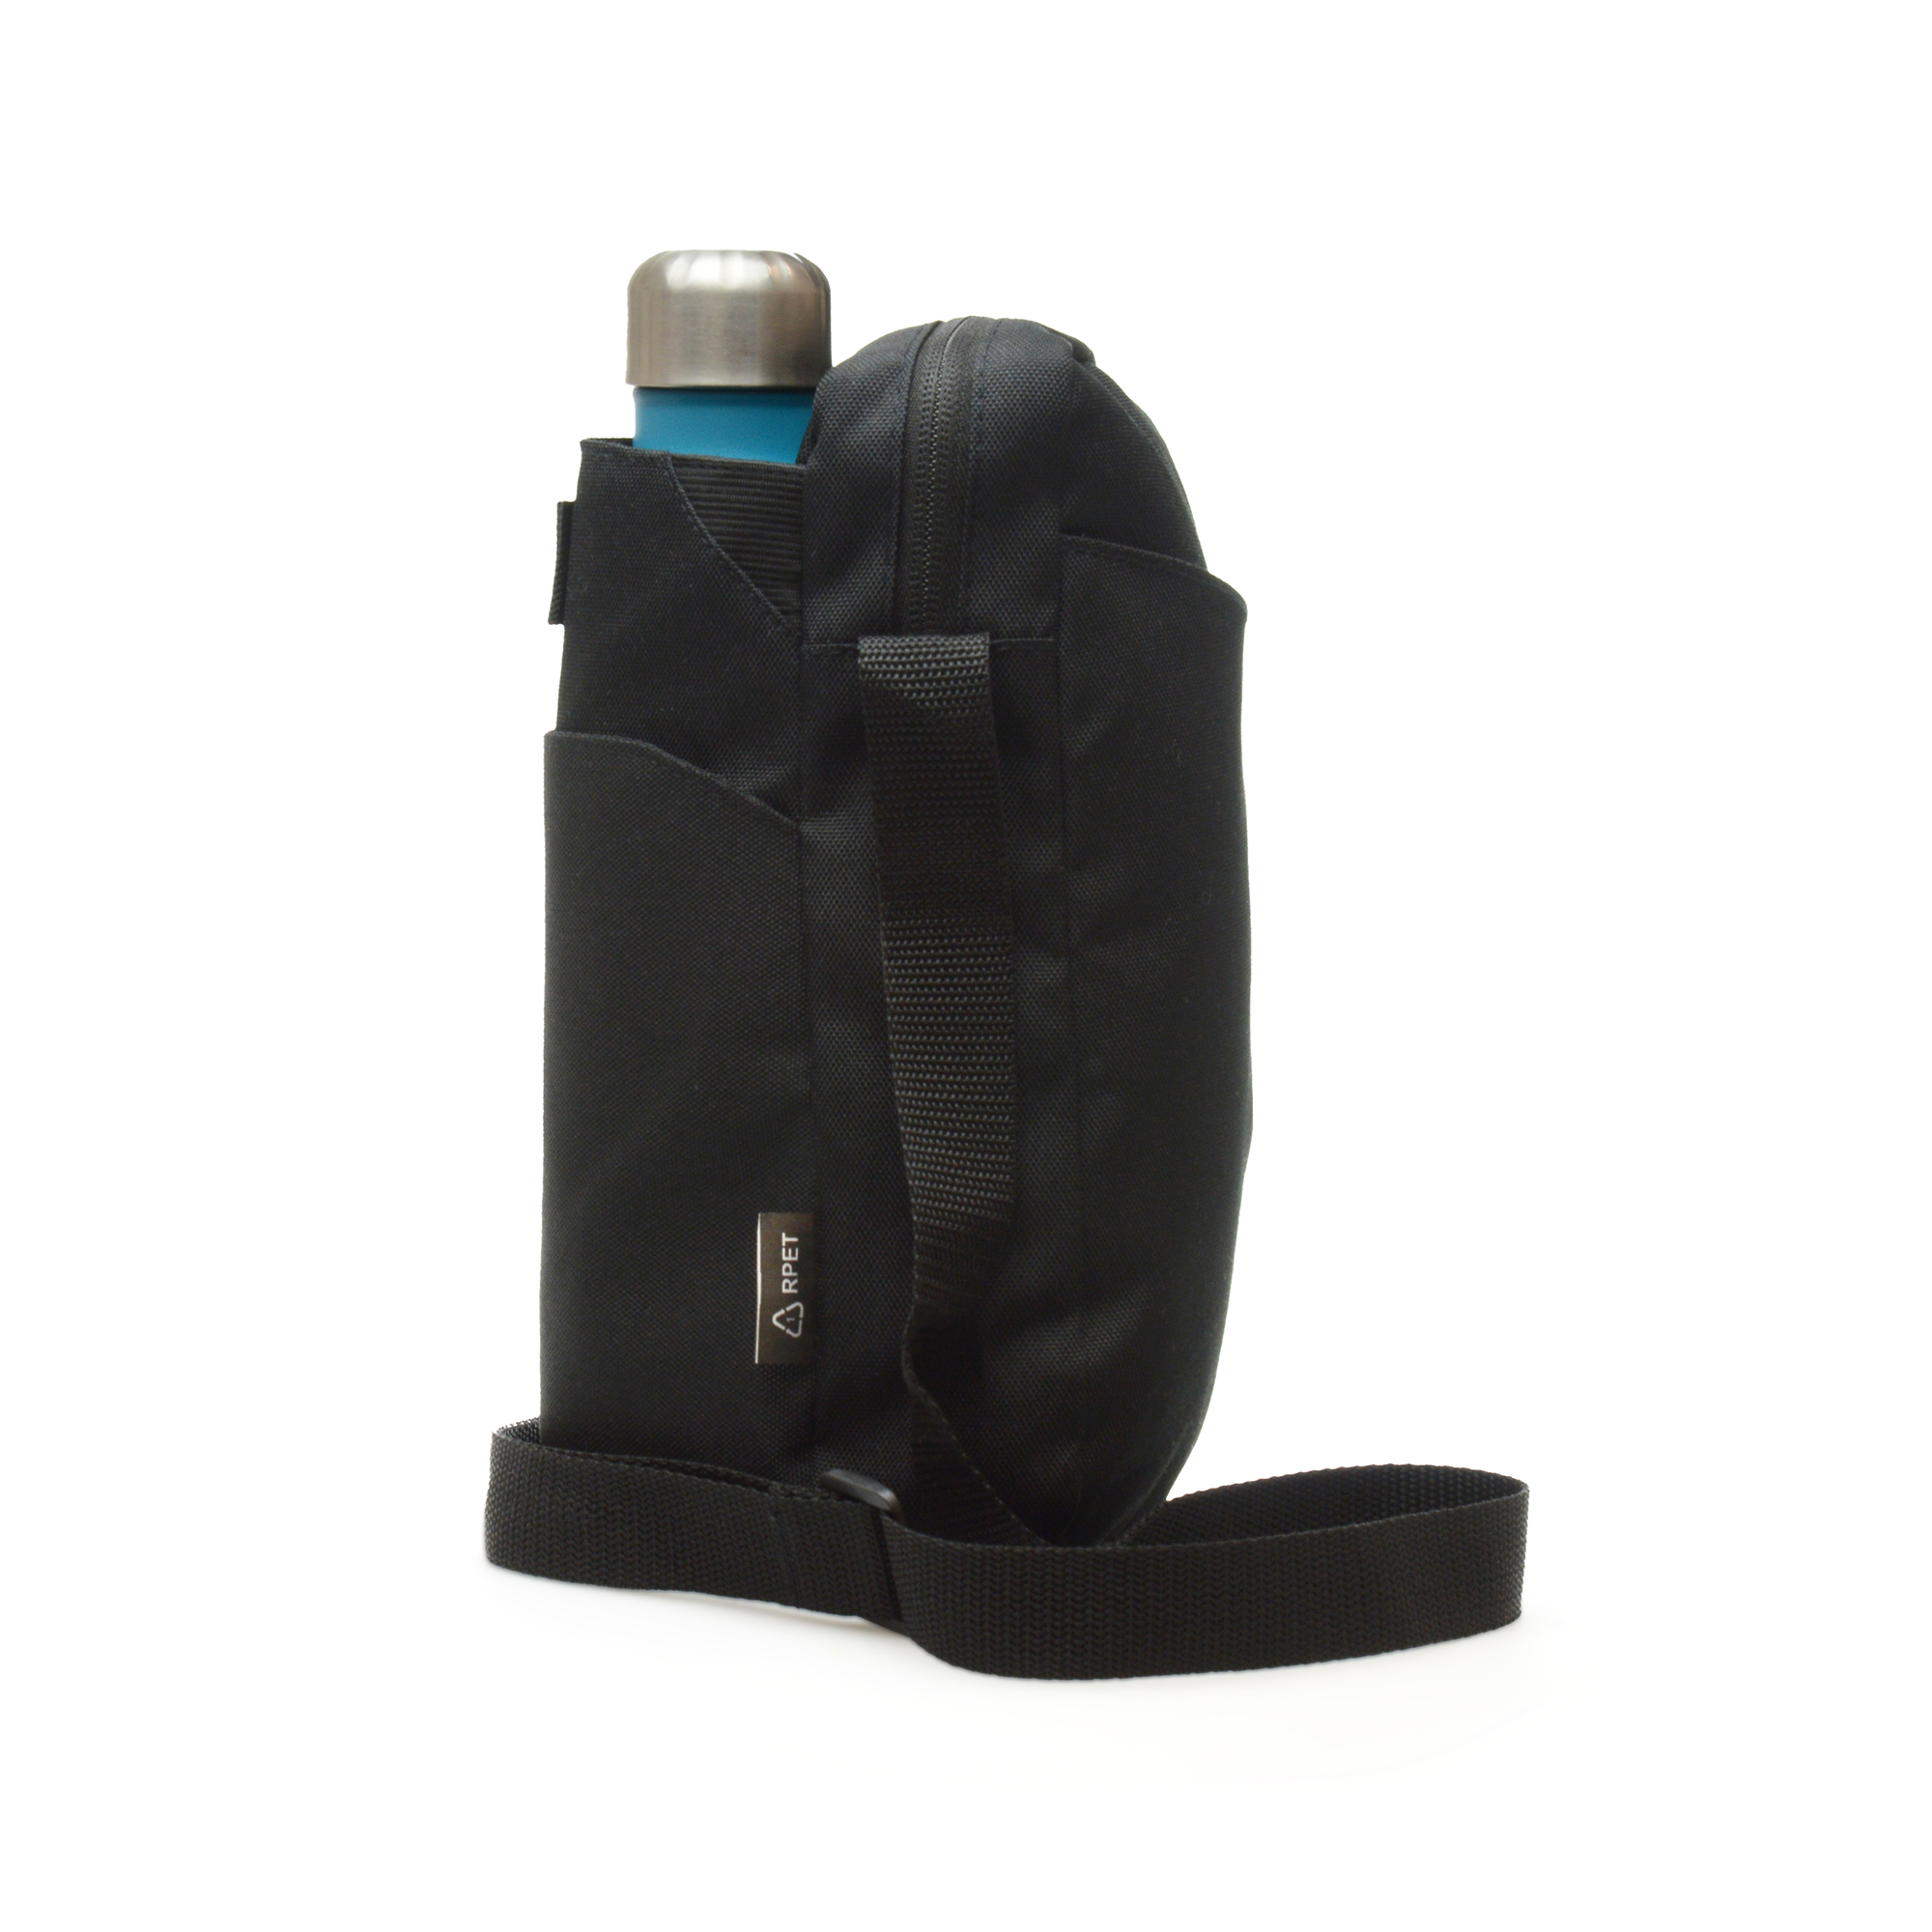 RPET cross body bag with zipped drinks bottle compartment and adjustable strap. Additional compartments for slim items such as mobile phone or wallet.